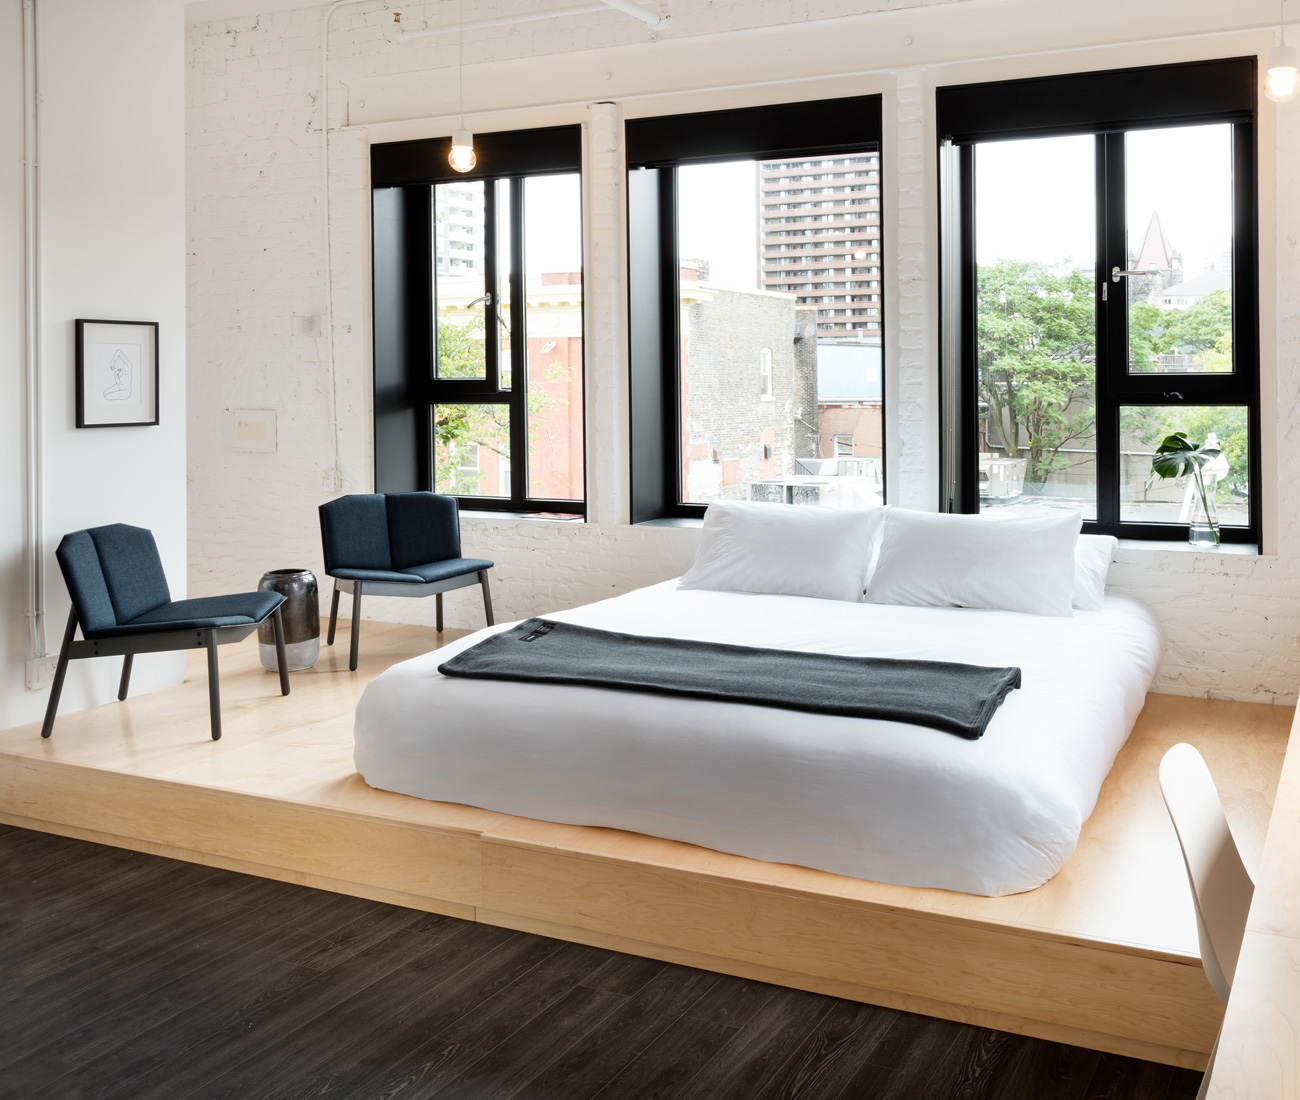 StudioAC’s custom-designed platform bed (made by RDG Millwork) has built-in cubbies. Cats Pajamas chair by Blu Dot, at Urban Mode; Ikea pendants.  